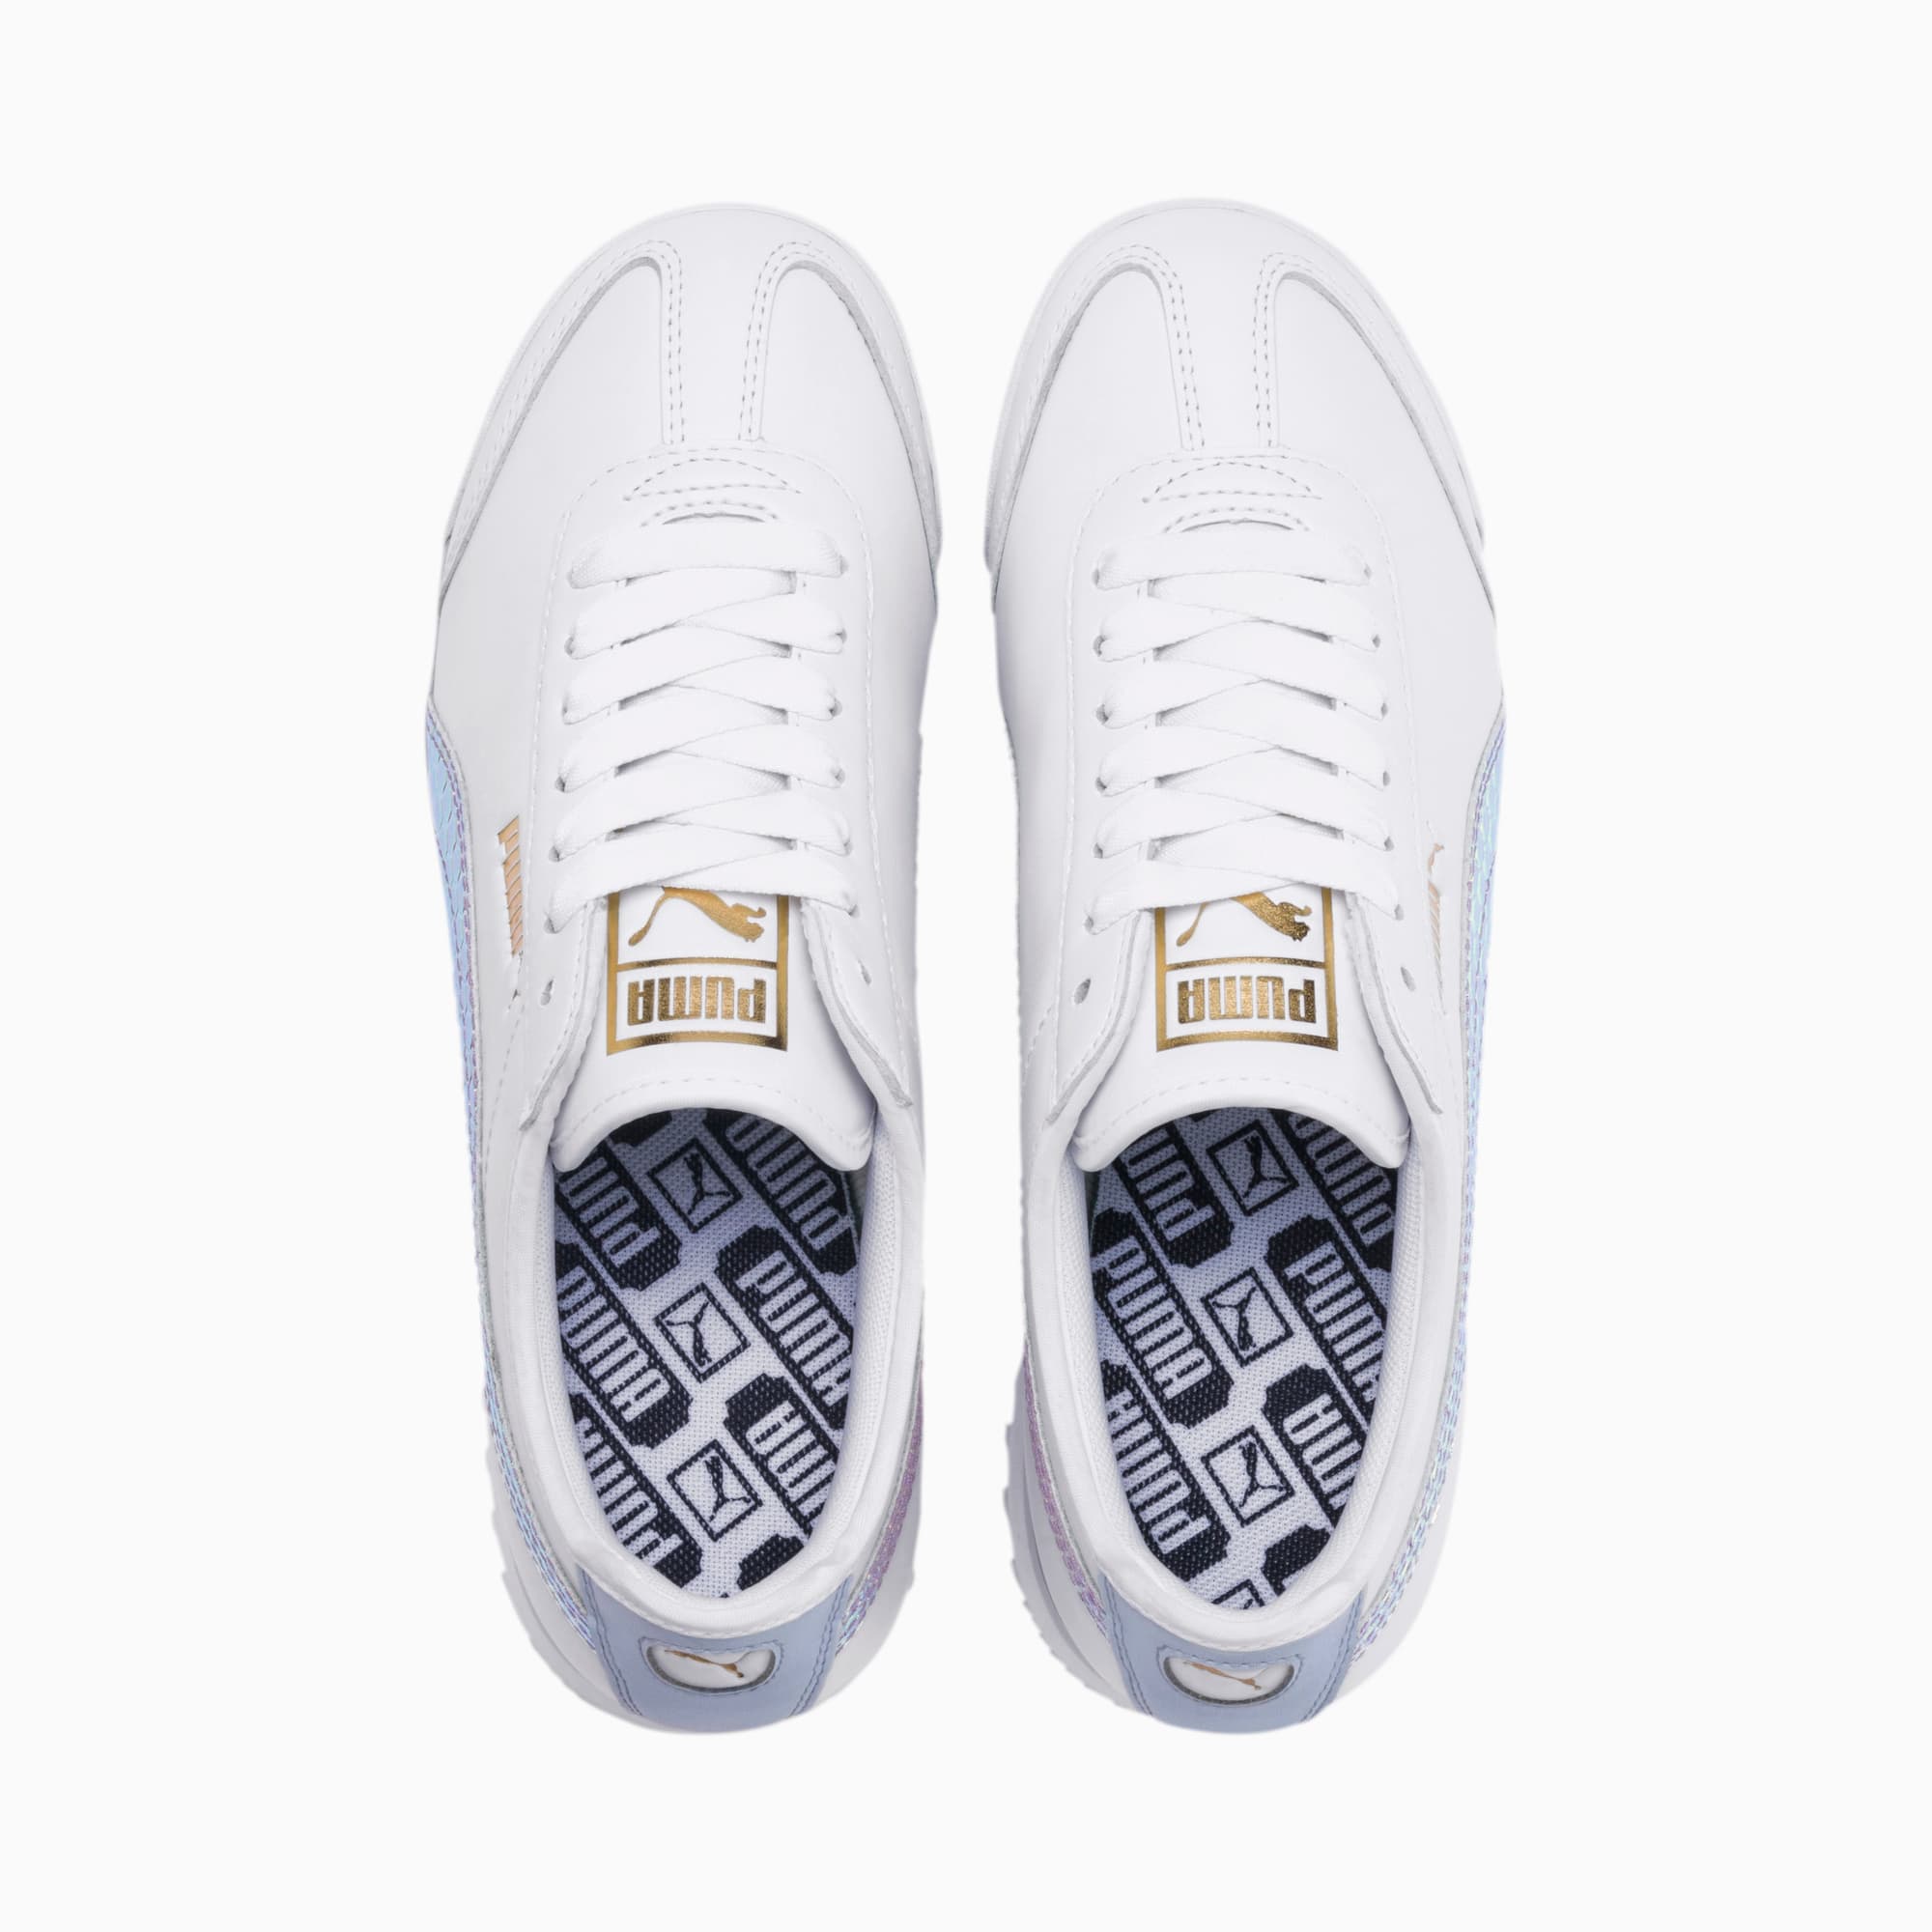 puma racer ind white sneakers